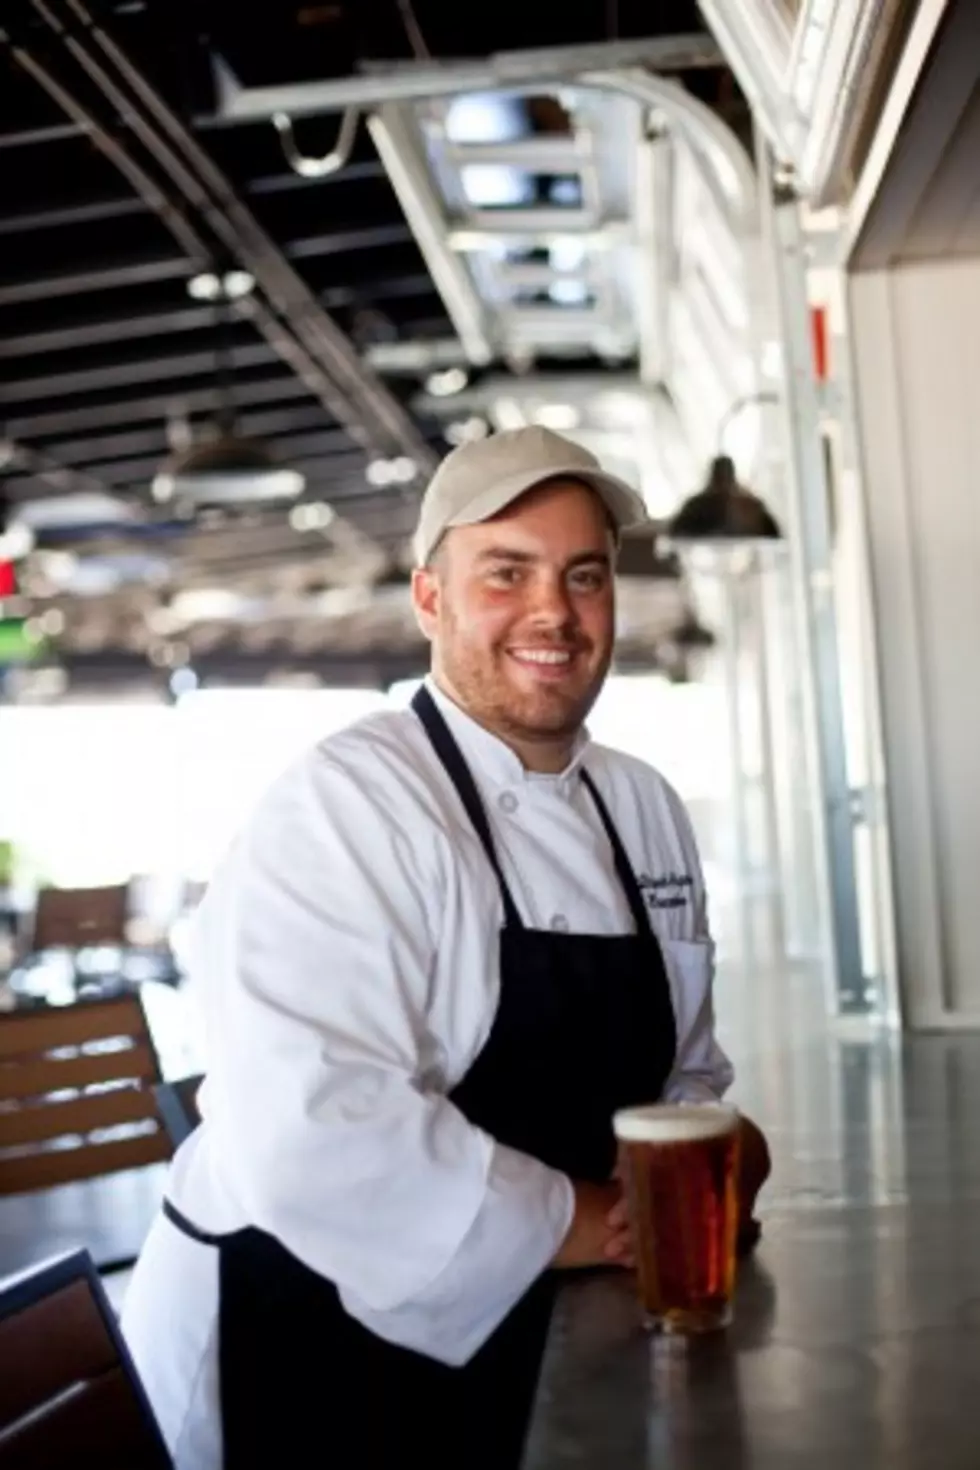 Seacoast Chef to Appear on Food Network&#8217;s &#8216;Cutthroat Kitchen&#8217;